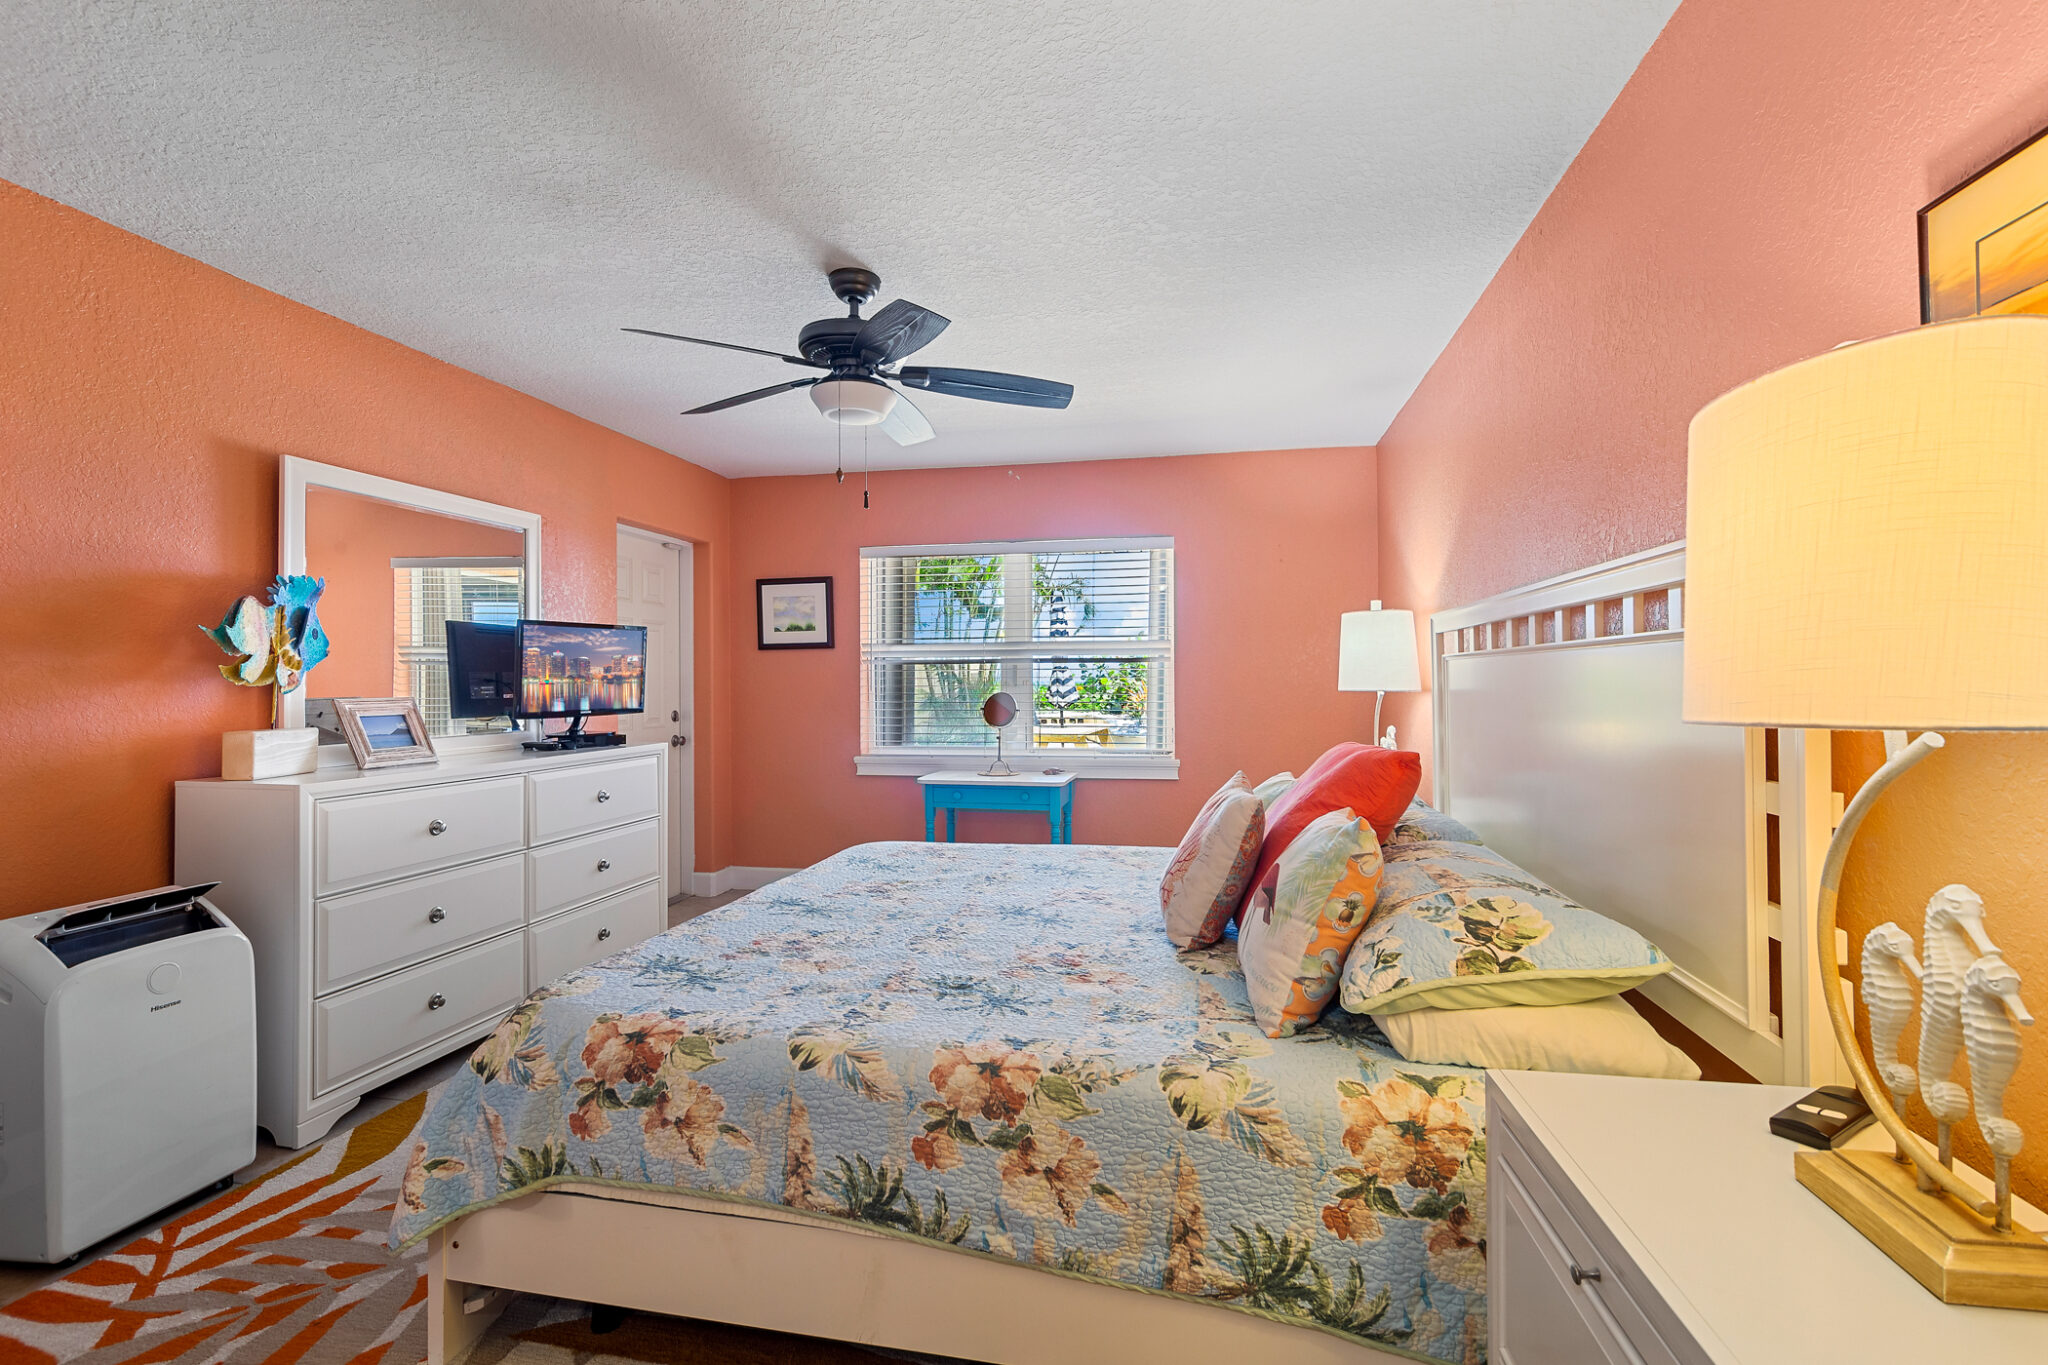 Bright welcoming looking room with orange paint and white furniture